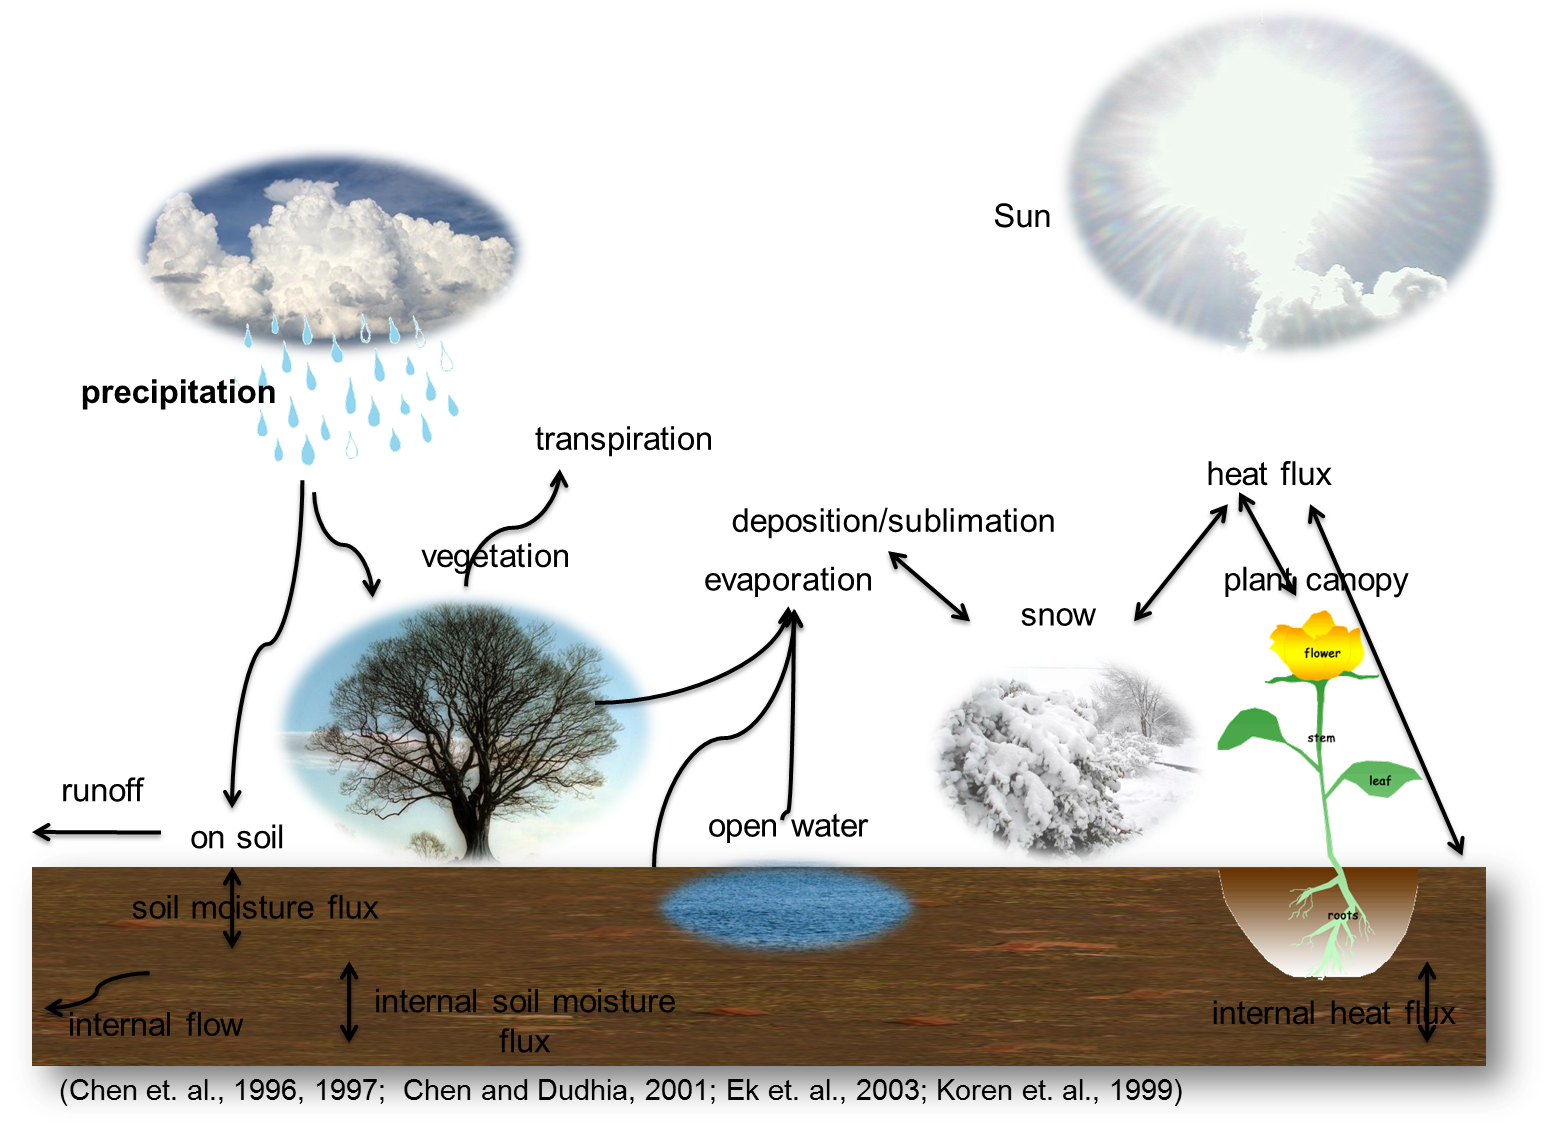 A picture of ground with plants and ponds and arrows showing how water moves from the clouds to the plants and ground and back